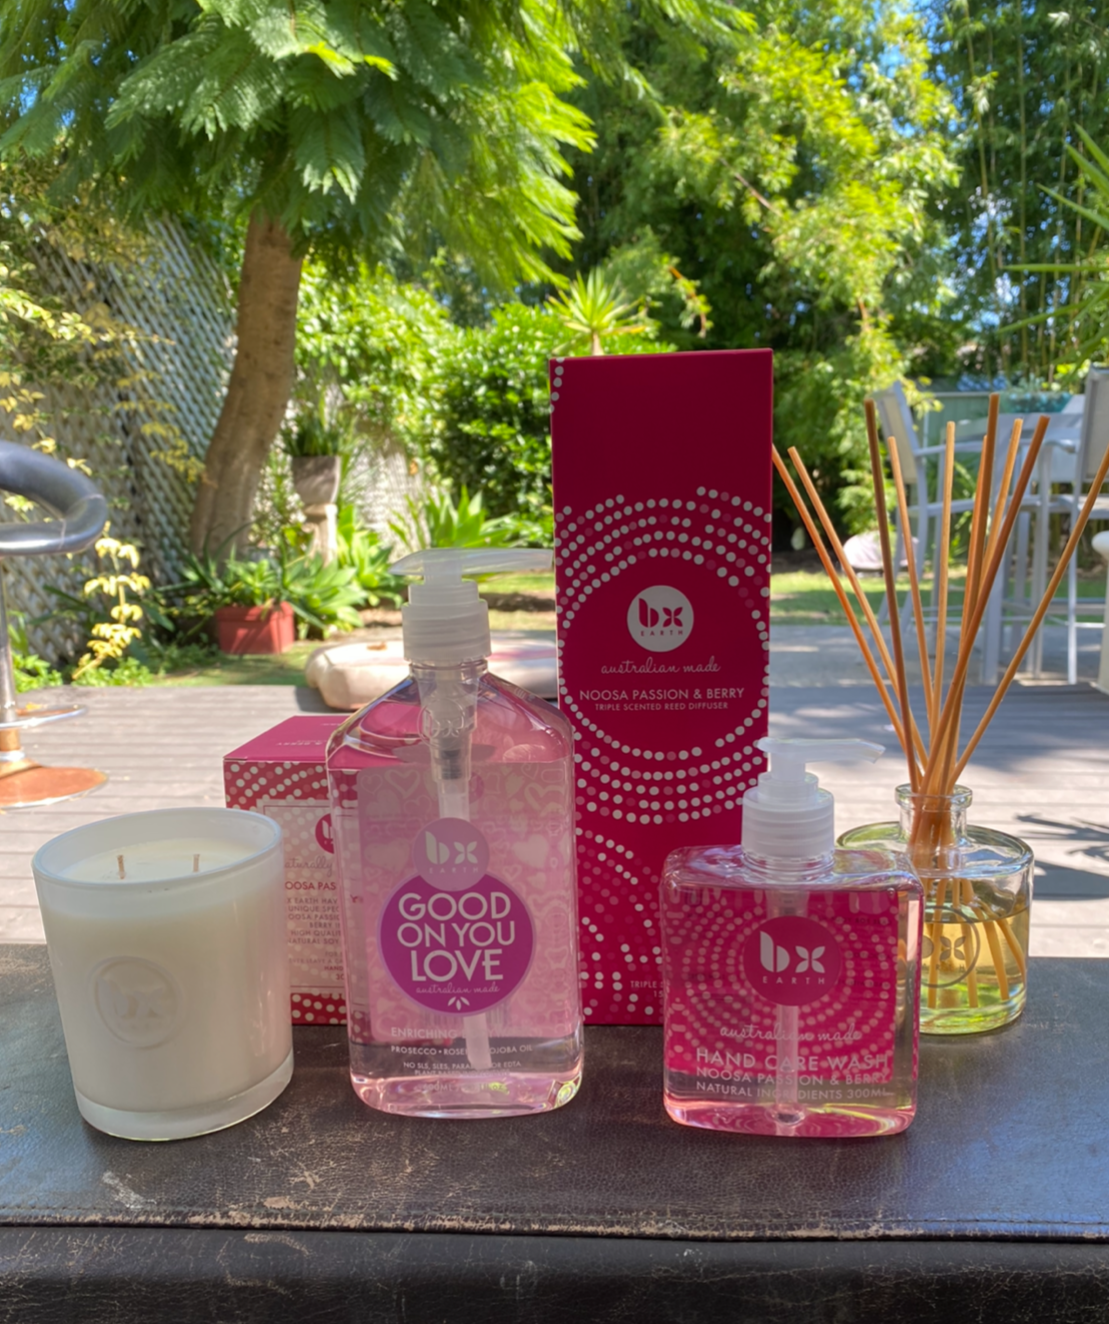 Pink Heaven combo pack with our Noosa passion berry candle, reed diffuser, matching hand wash and our Good on you Love body wash